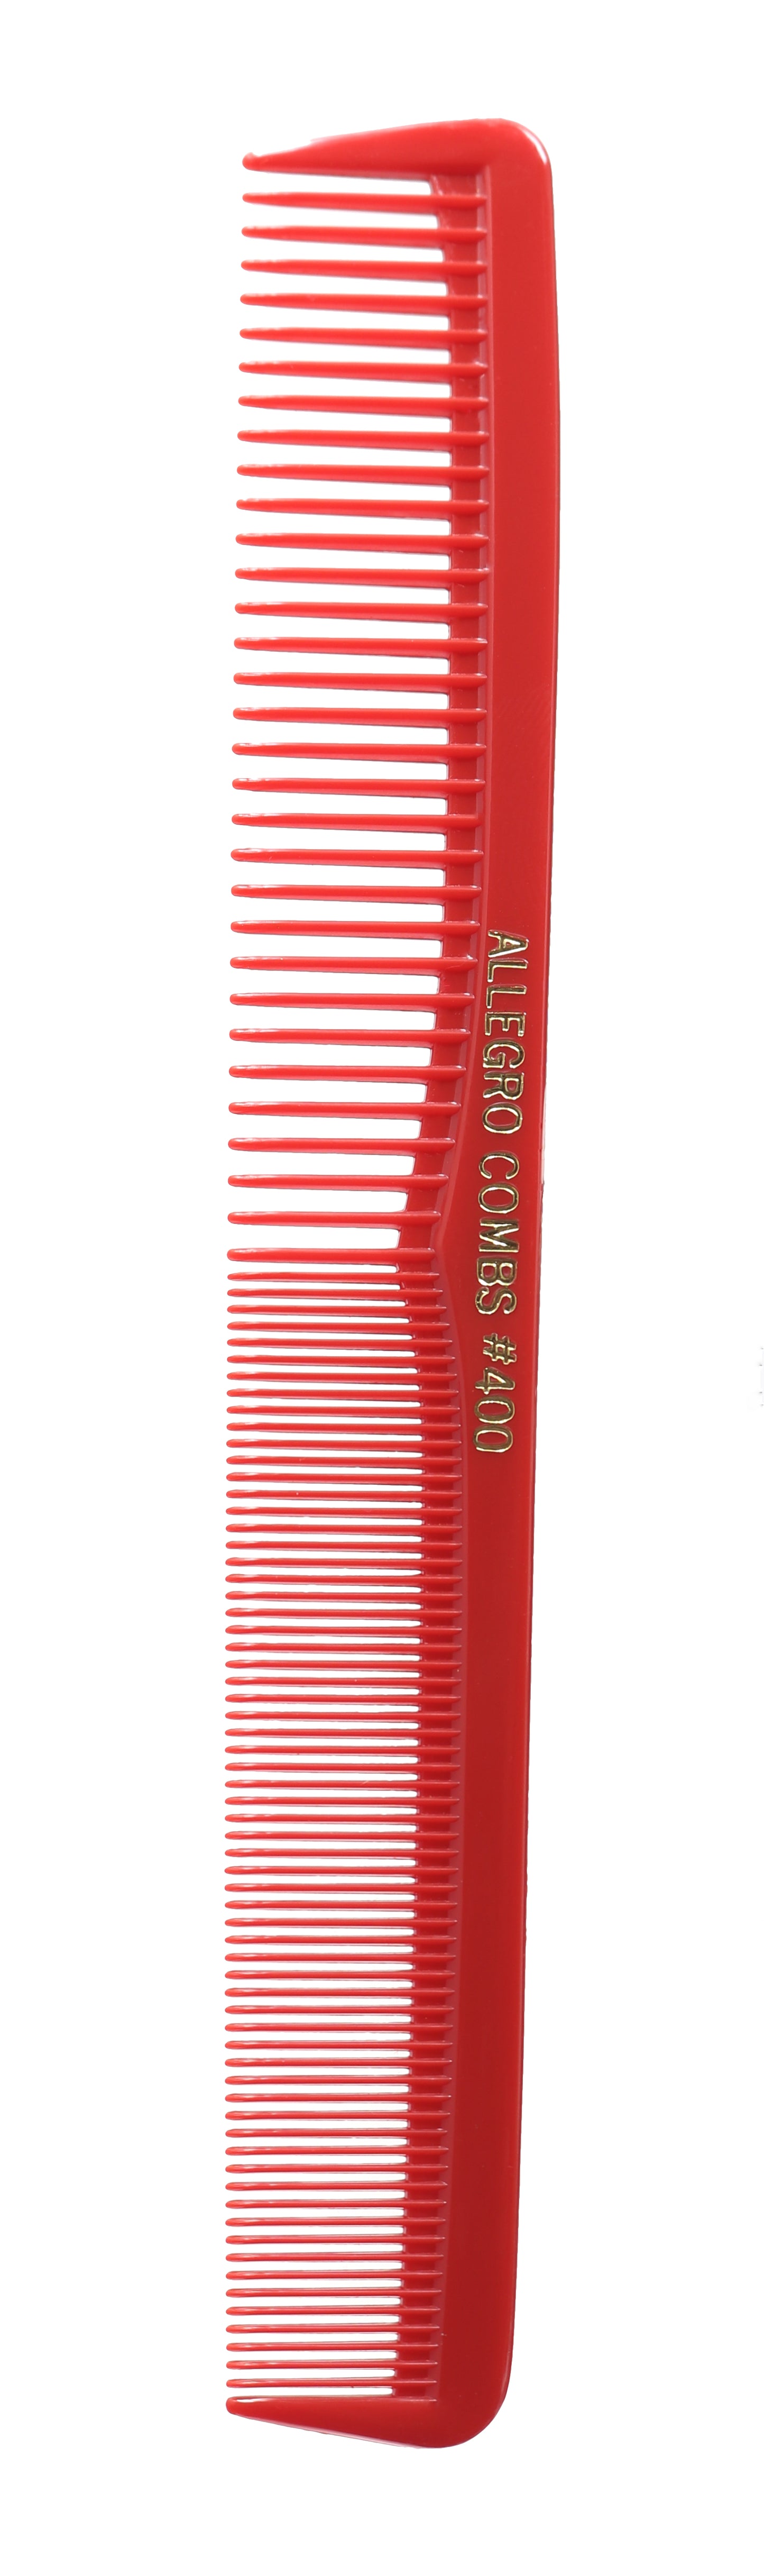 Allegro Combs 400 Barbers Combs Cutting Combs All Purpose Combs. Red combs. 12 Pack